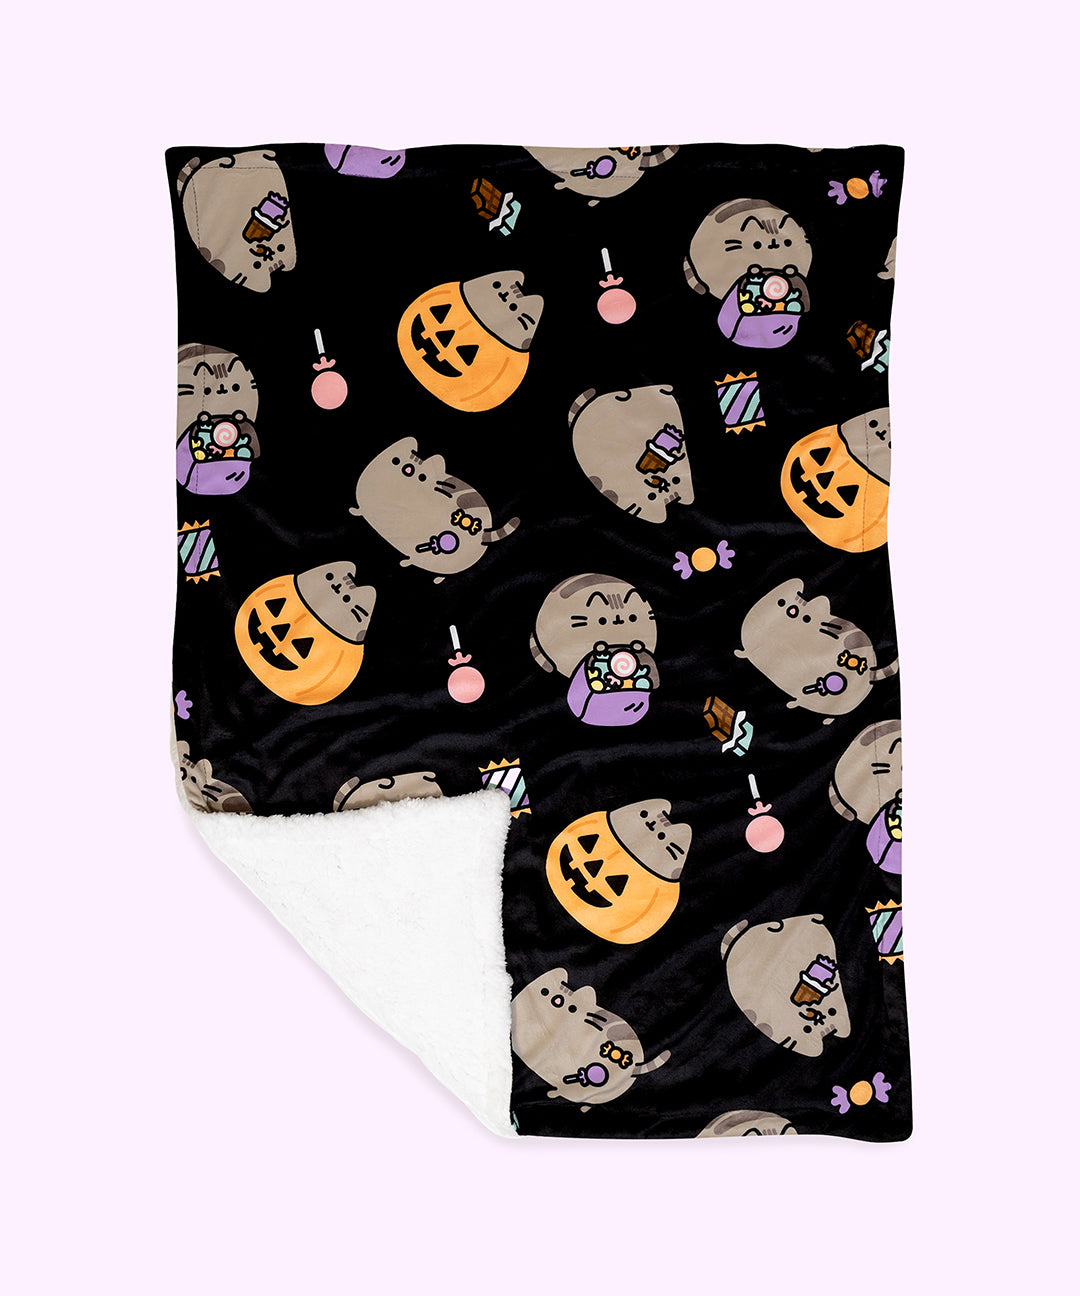 Front view of the Pusheen Pet Halloween Blanket. The micro flannel front side features an all over print of Pusheen taking part in Halloween activities such as trick-or-treating, eating chocolate, getting scared, and sitting in a pumpkin. The grey Pusheen cats are surrounded by chocolates, lollies, and candies.  